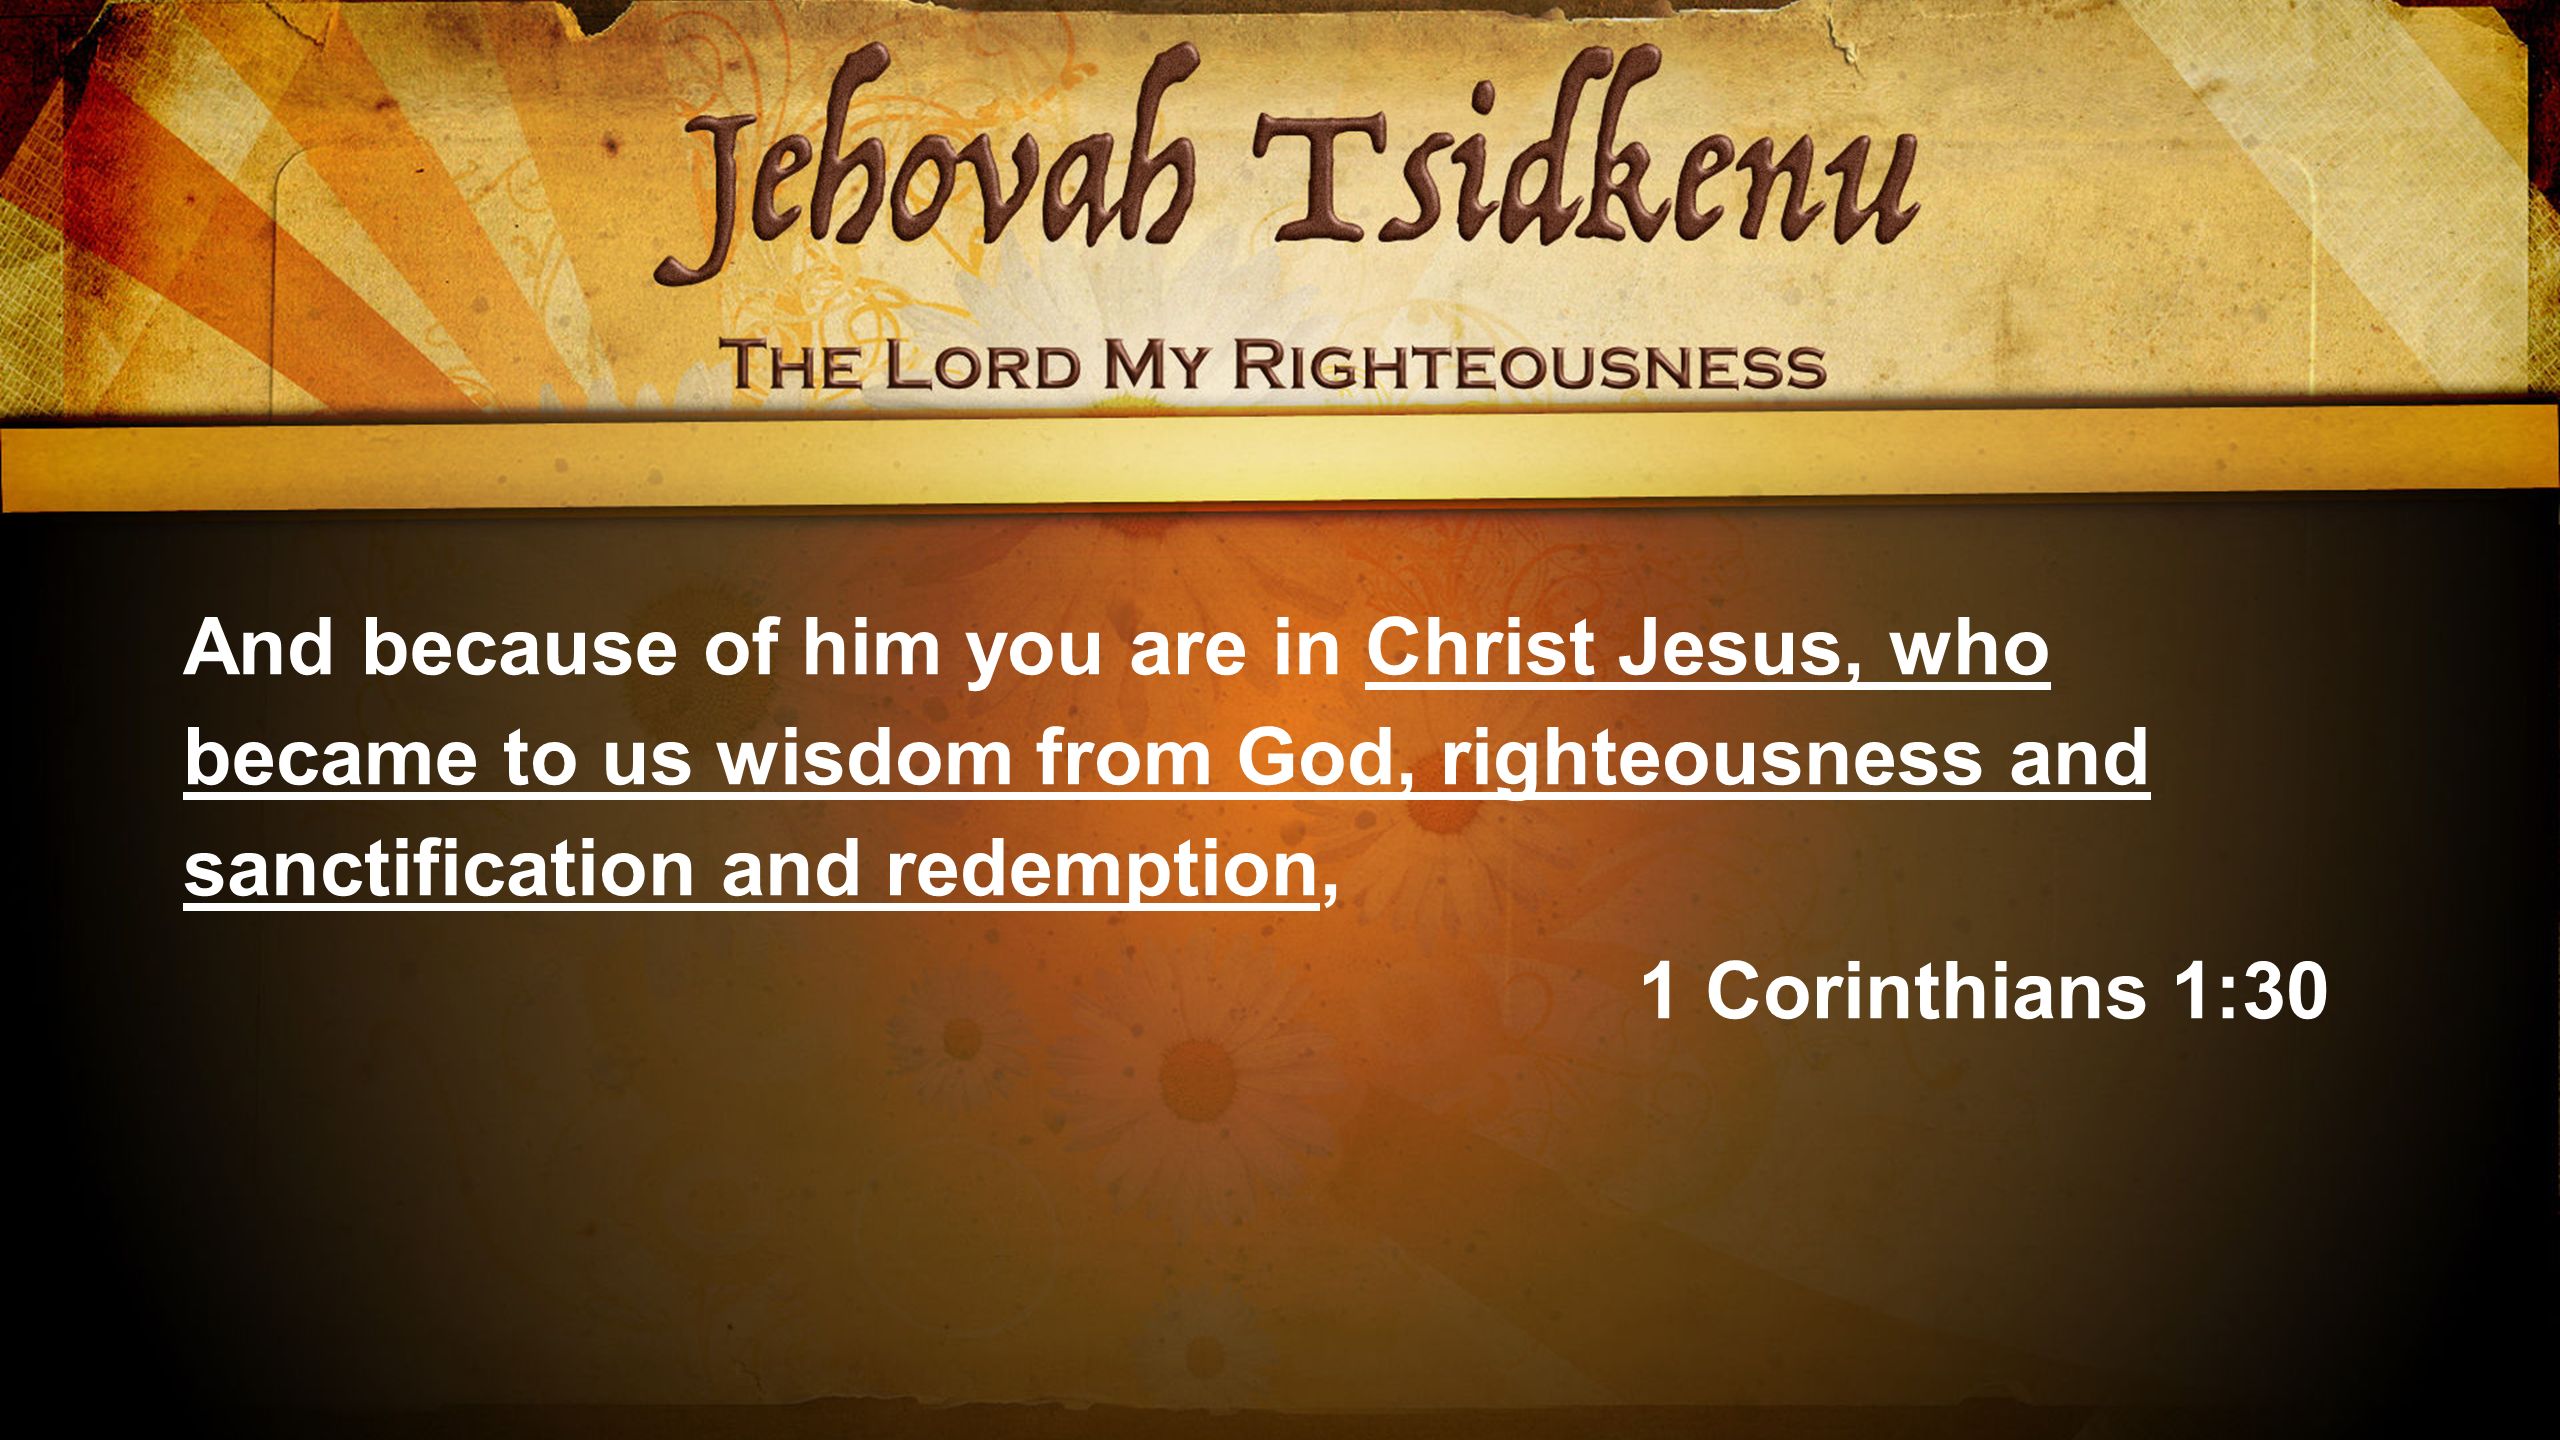 And because of him you are in Christ Jesus, who became to us wisdom from God, righteousness and sanctification and redemption, 1 Corinthians 1:30